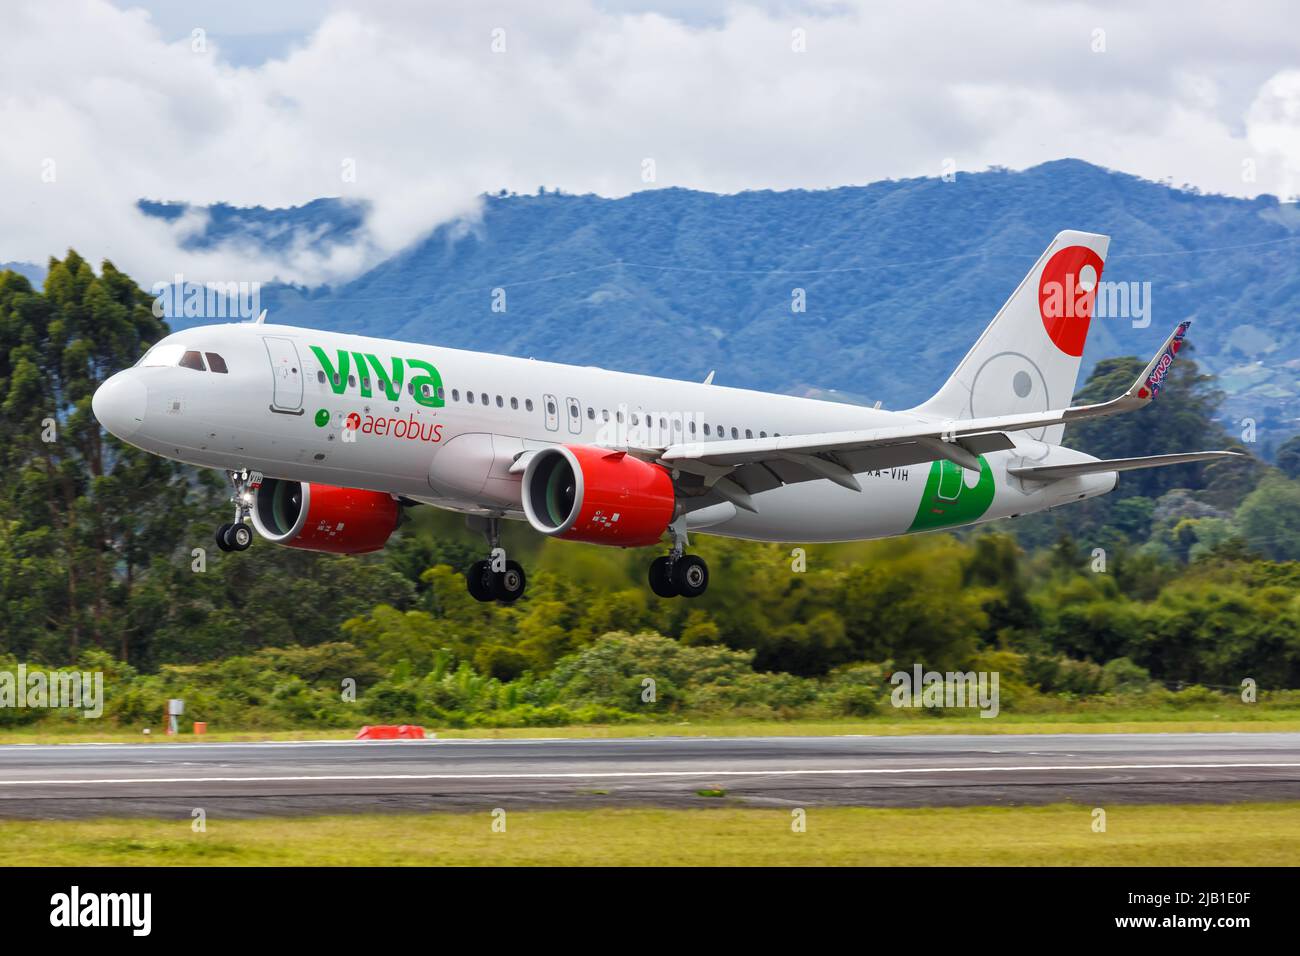 Medellin, Colombia - April 19, 2022: Viva Aerobus Airbus A320neo airplane at Medellin Rionegro airport (MDE) in Colombia. Stock Photo